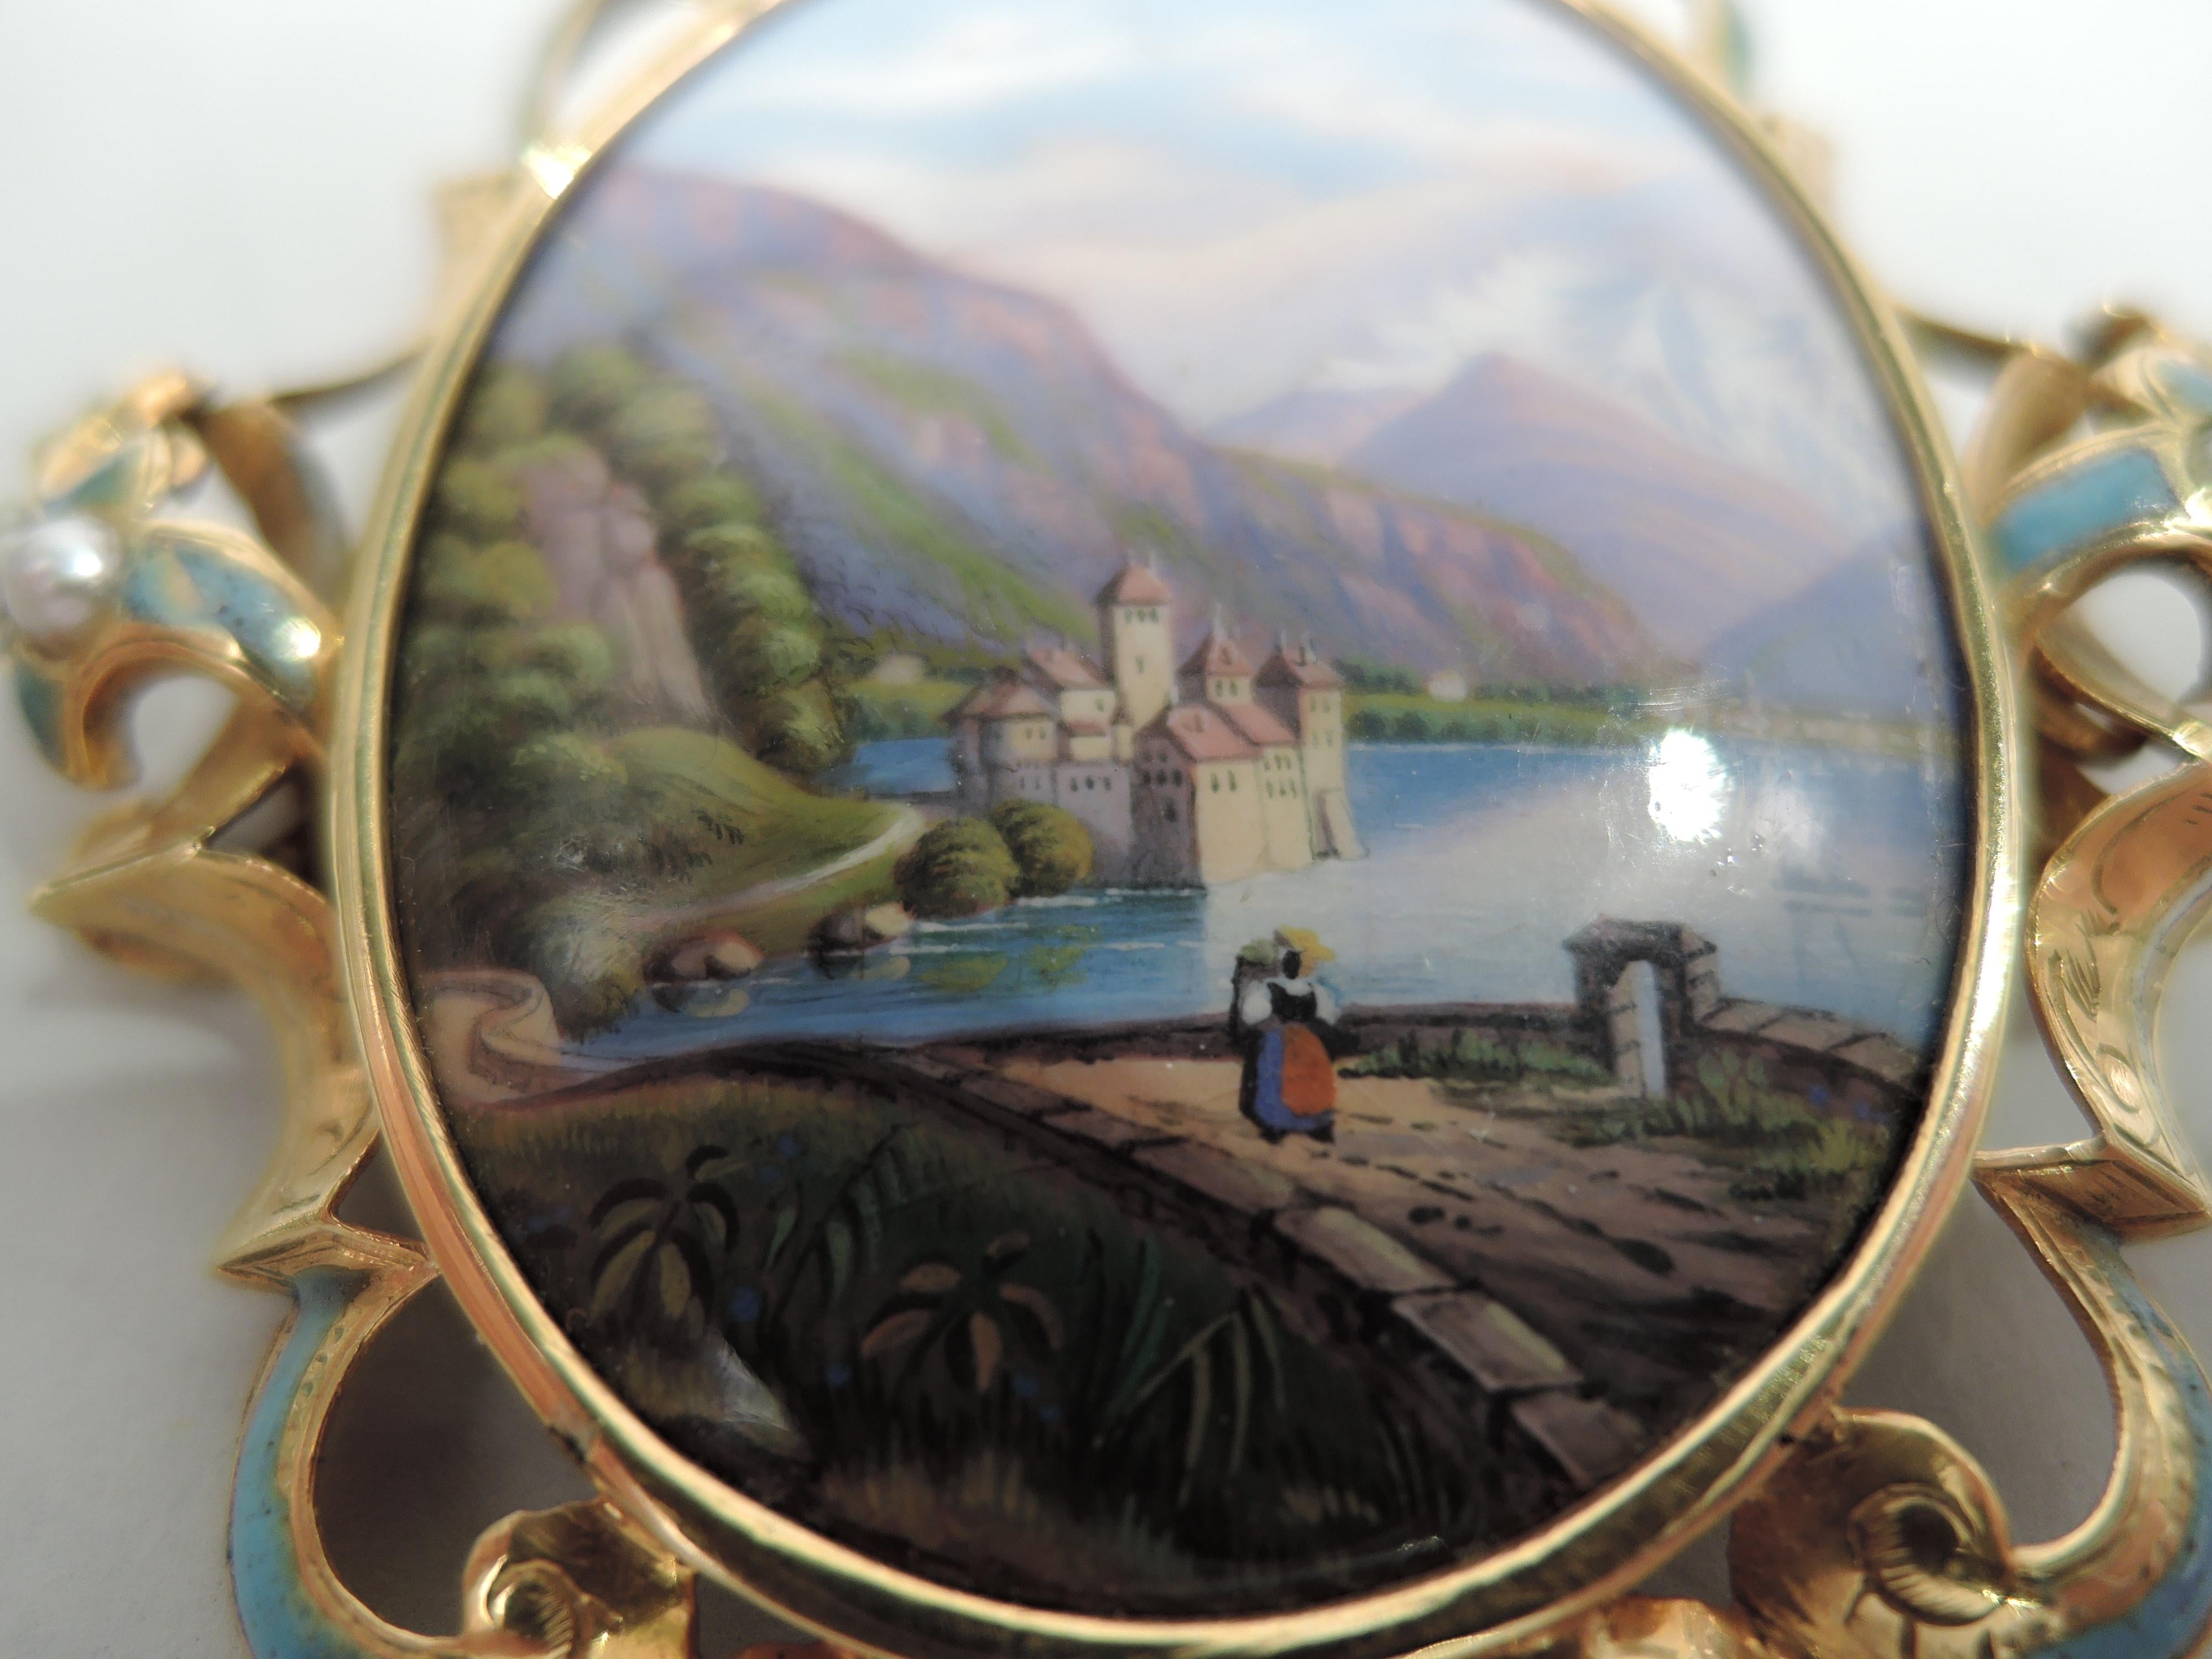 Swiss brooch, ca 1880. Oval enameled plaque in gold frame; rim comprises applied scrolls heightened with enamel and inset with pearls.The plaque depicts the Château de Chillon, a medieval castle set on an island in Lake Geneva, with Mont Blanc in